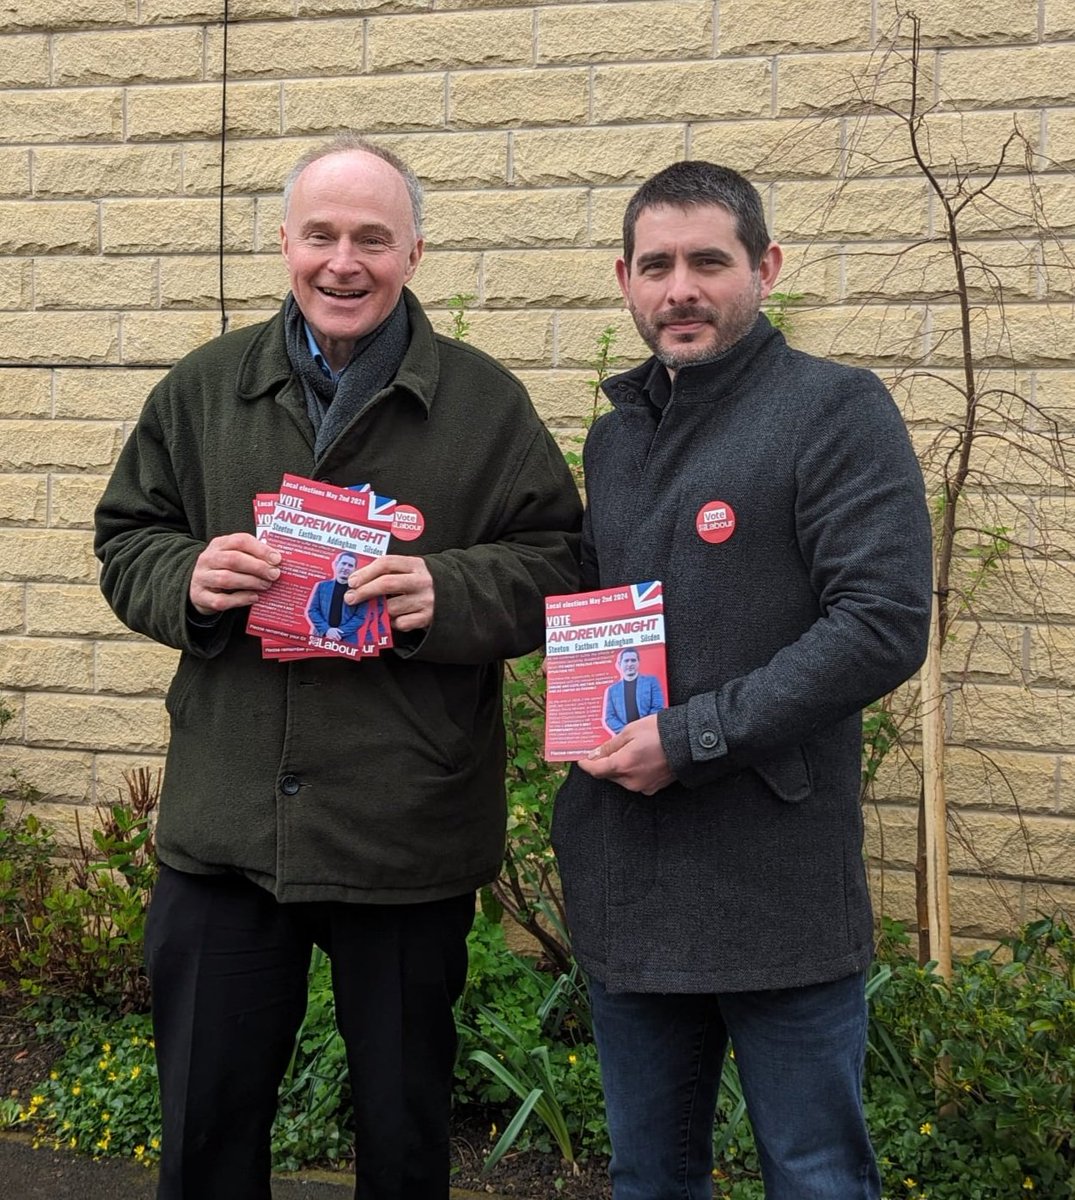 Canvassing with John Grogan today - Tories very unhappy and largely intending to stay at home, a number of switchers however. Despite the rain, it's been an enjoyable day in Steeton!